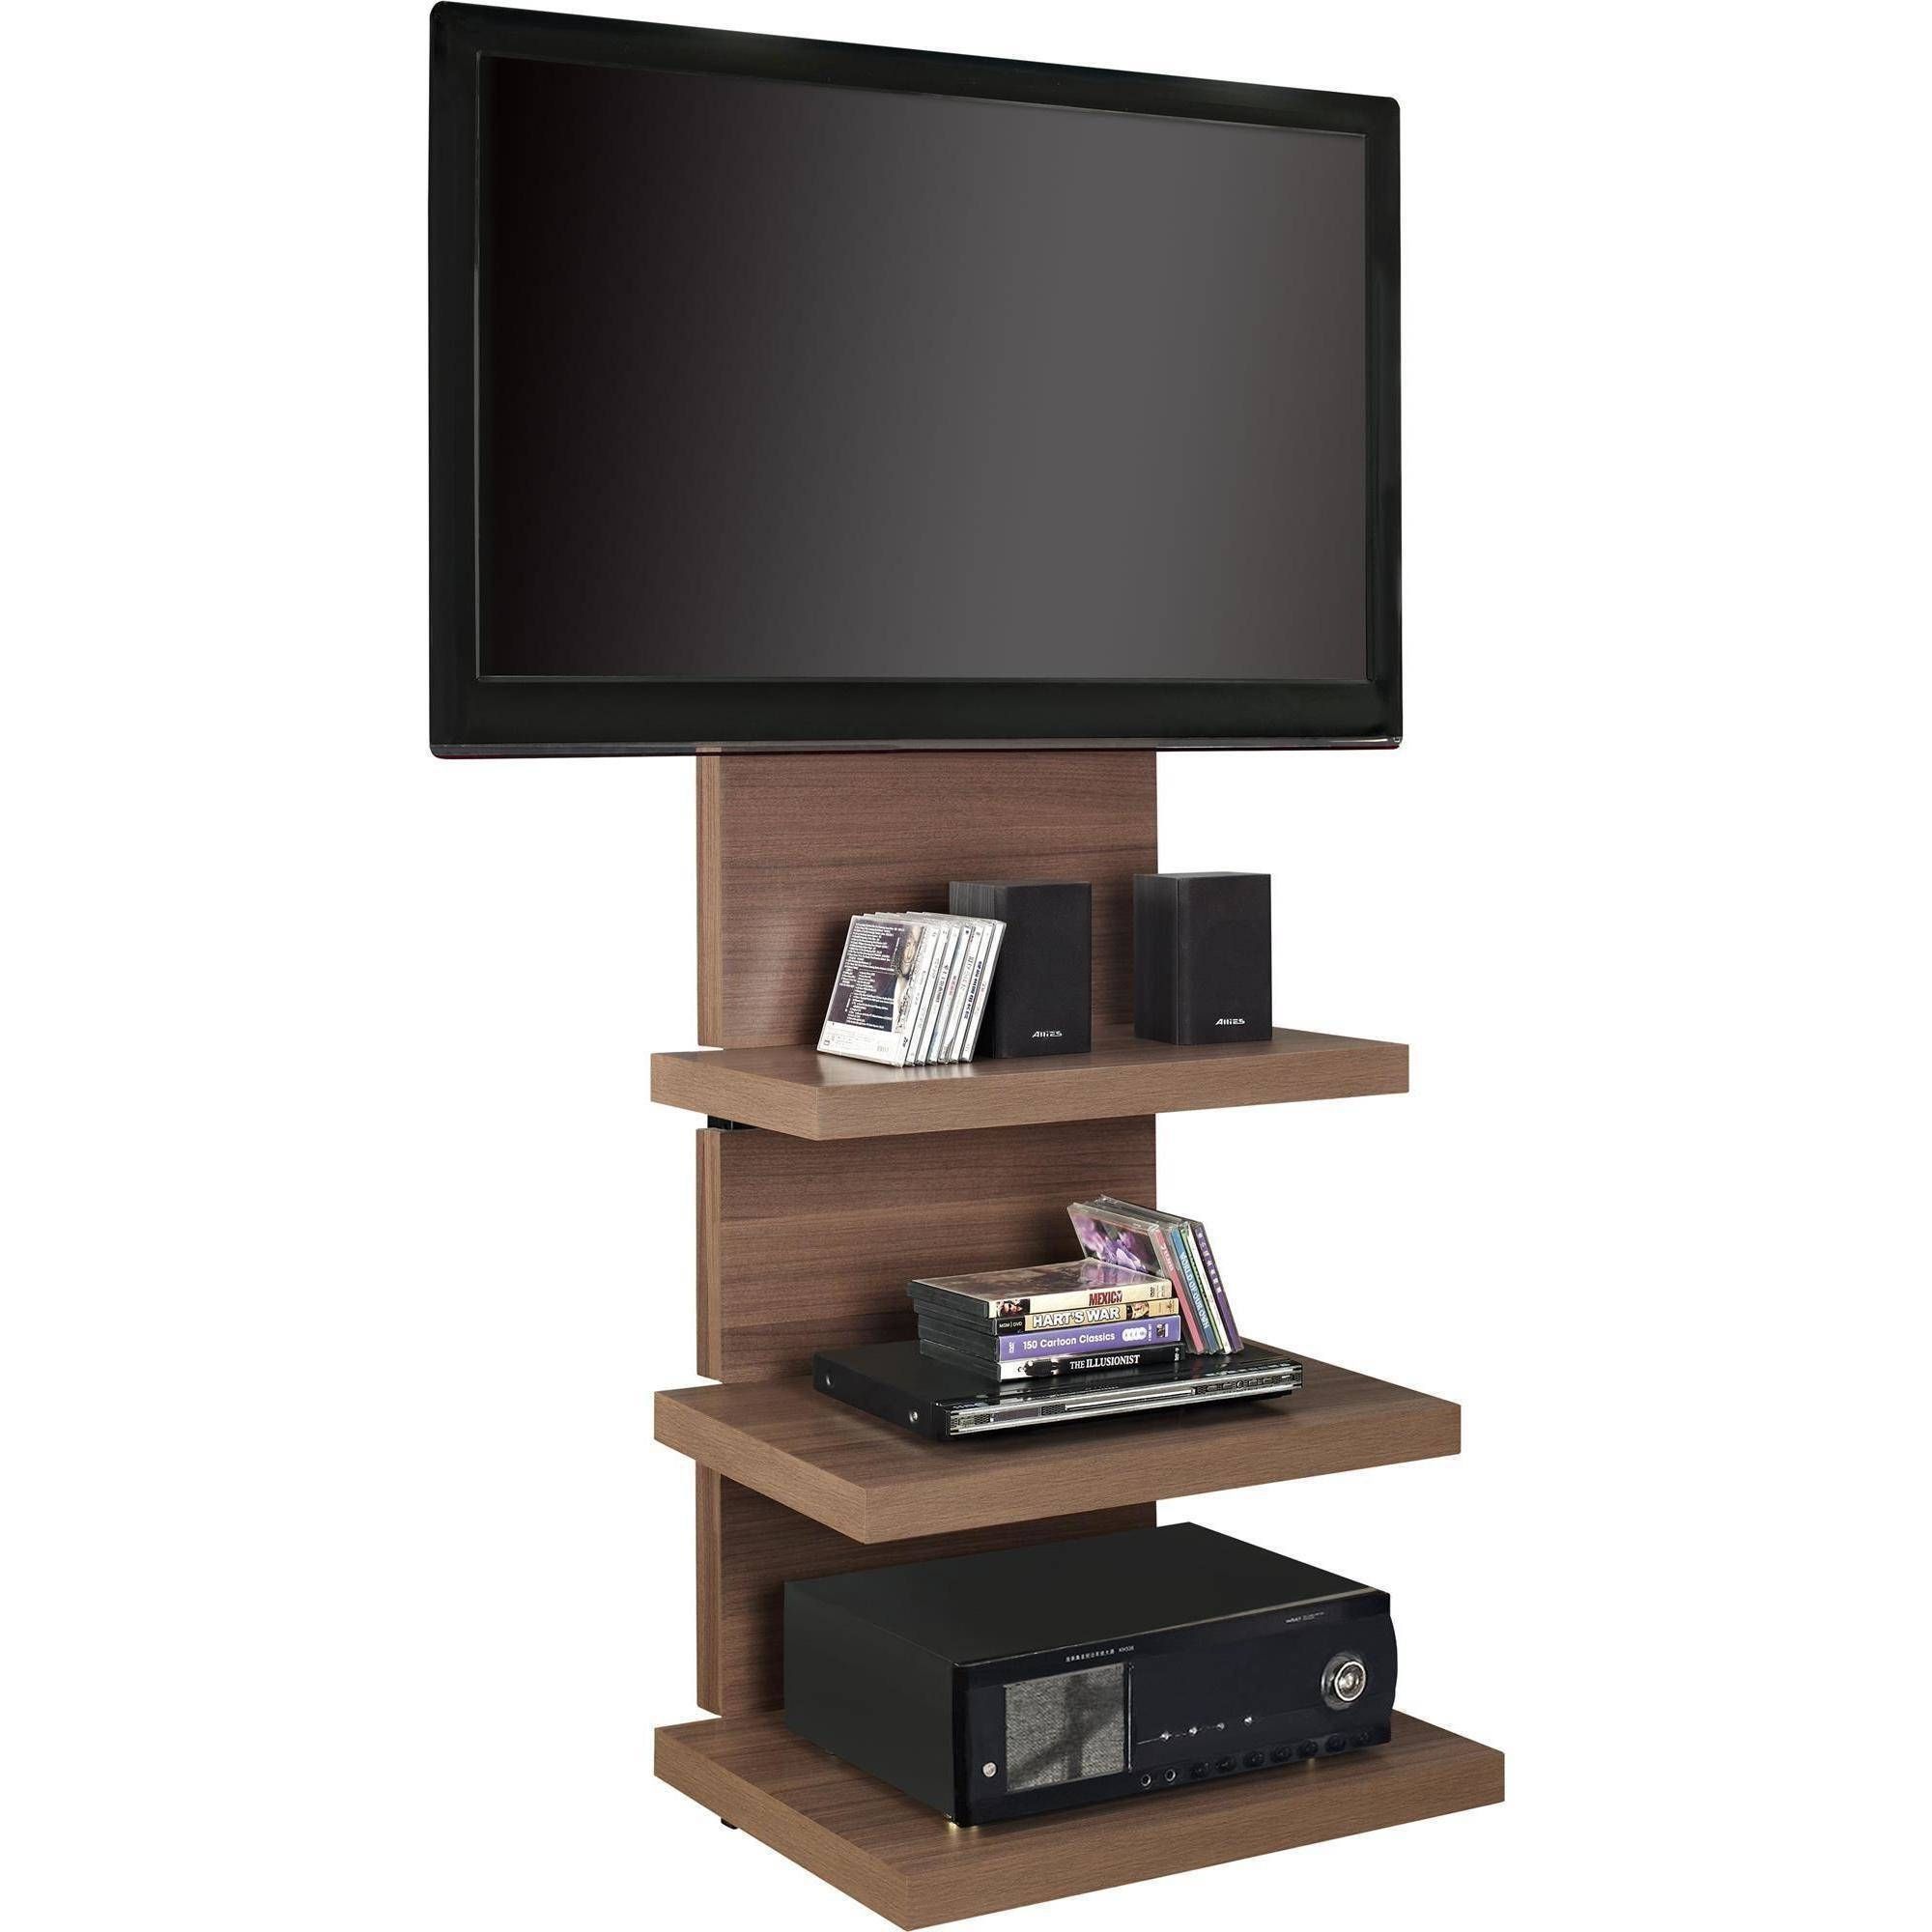 Altra Wall Mount Tv Stand With 3 Shelves, For Tvs Up To 60" | Ebay Within Modern Wall Mount Tv Stands (View 15 of 15)